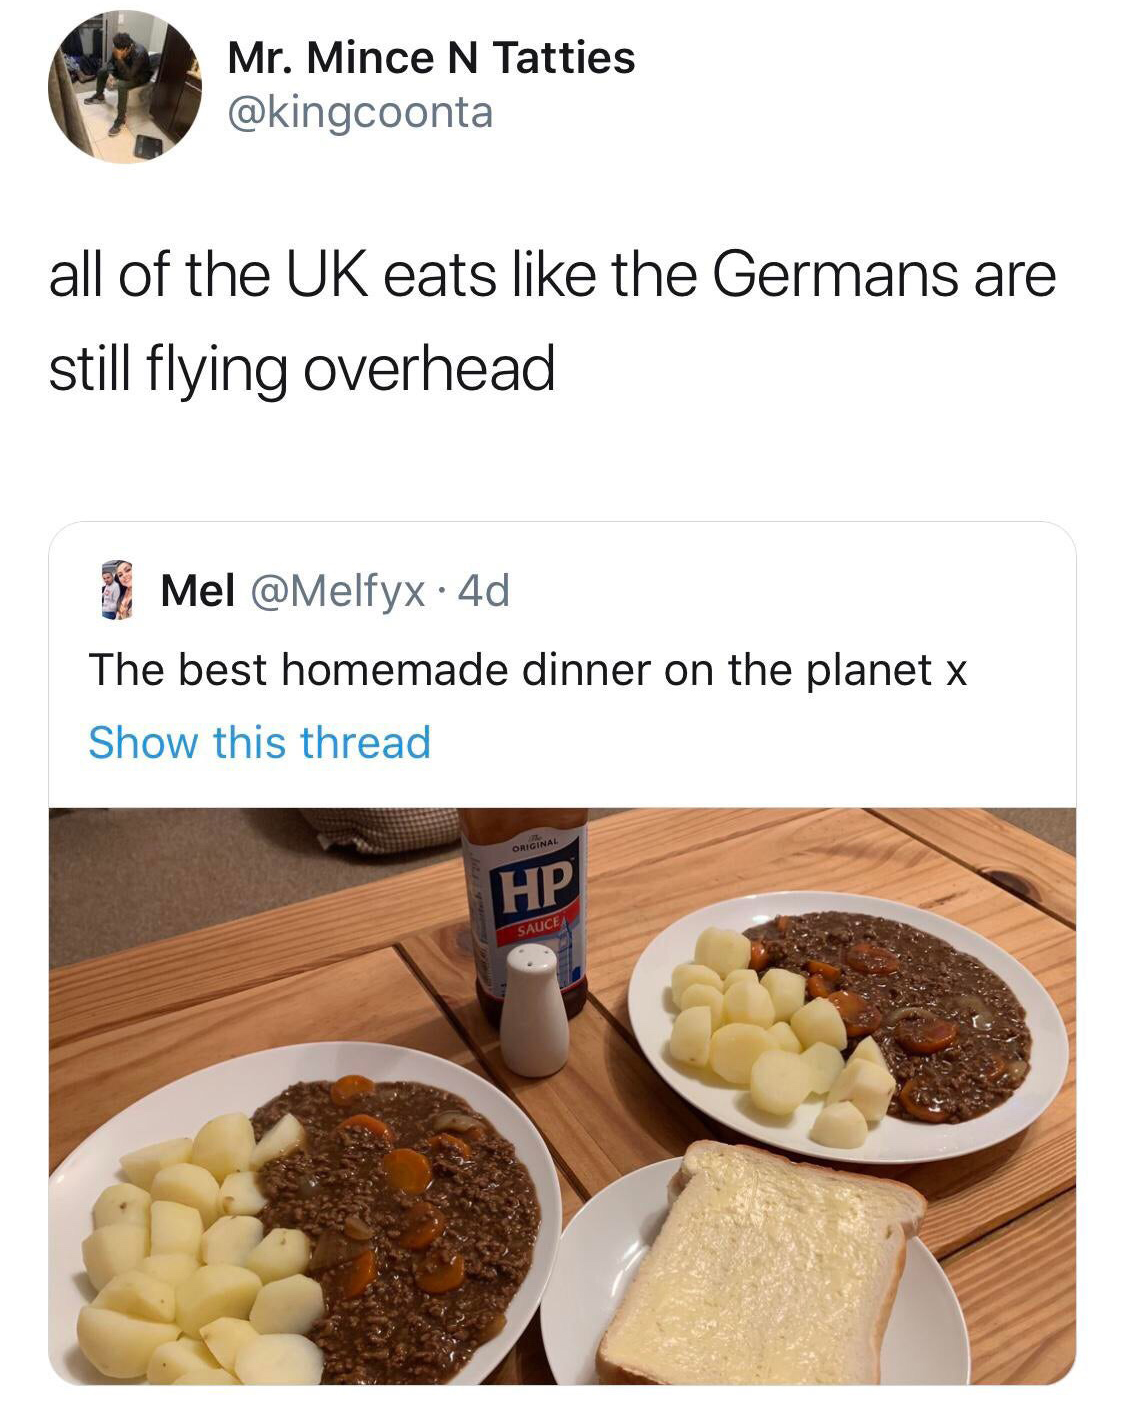 dish - Mr. Mince N Tatties all of the Uk eats the Germans are still flying overhead Mel. 4d The best homemade dinner on the planet x Show this thread Hp